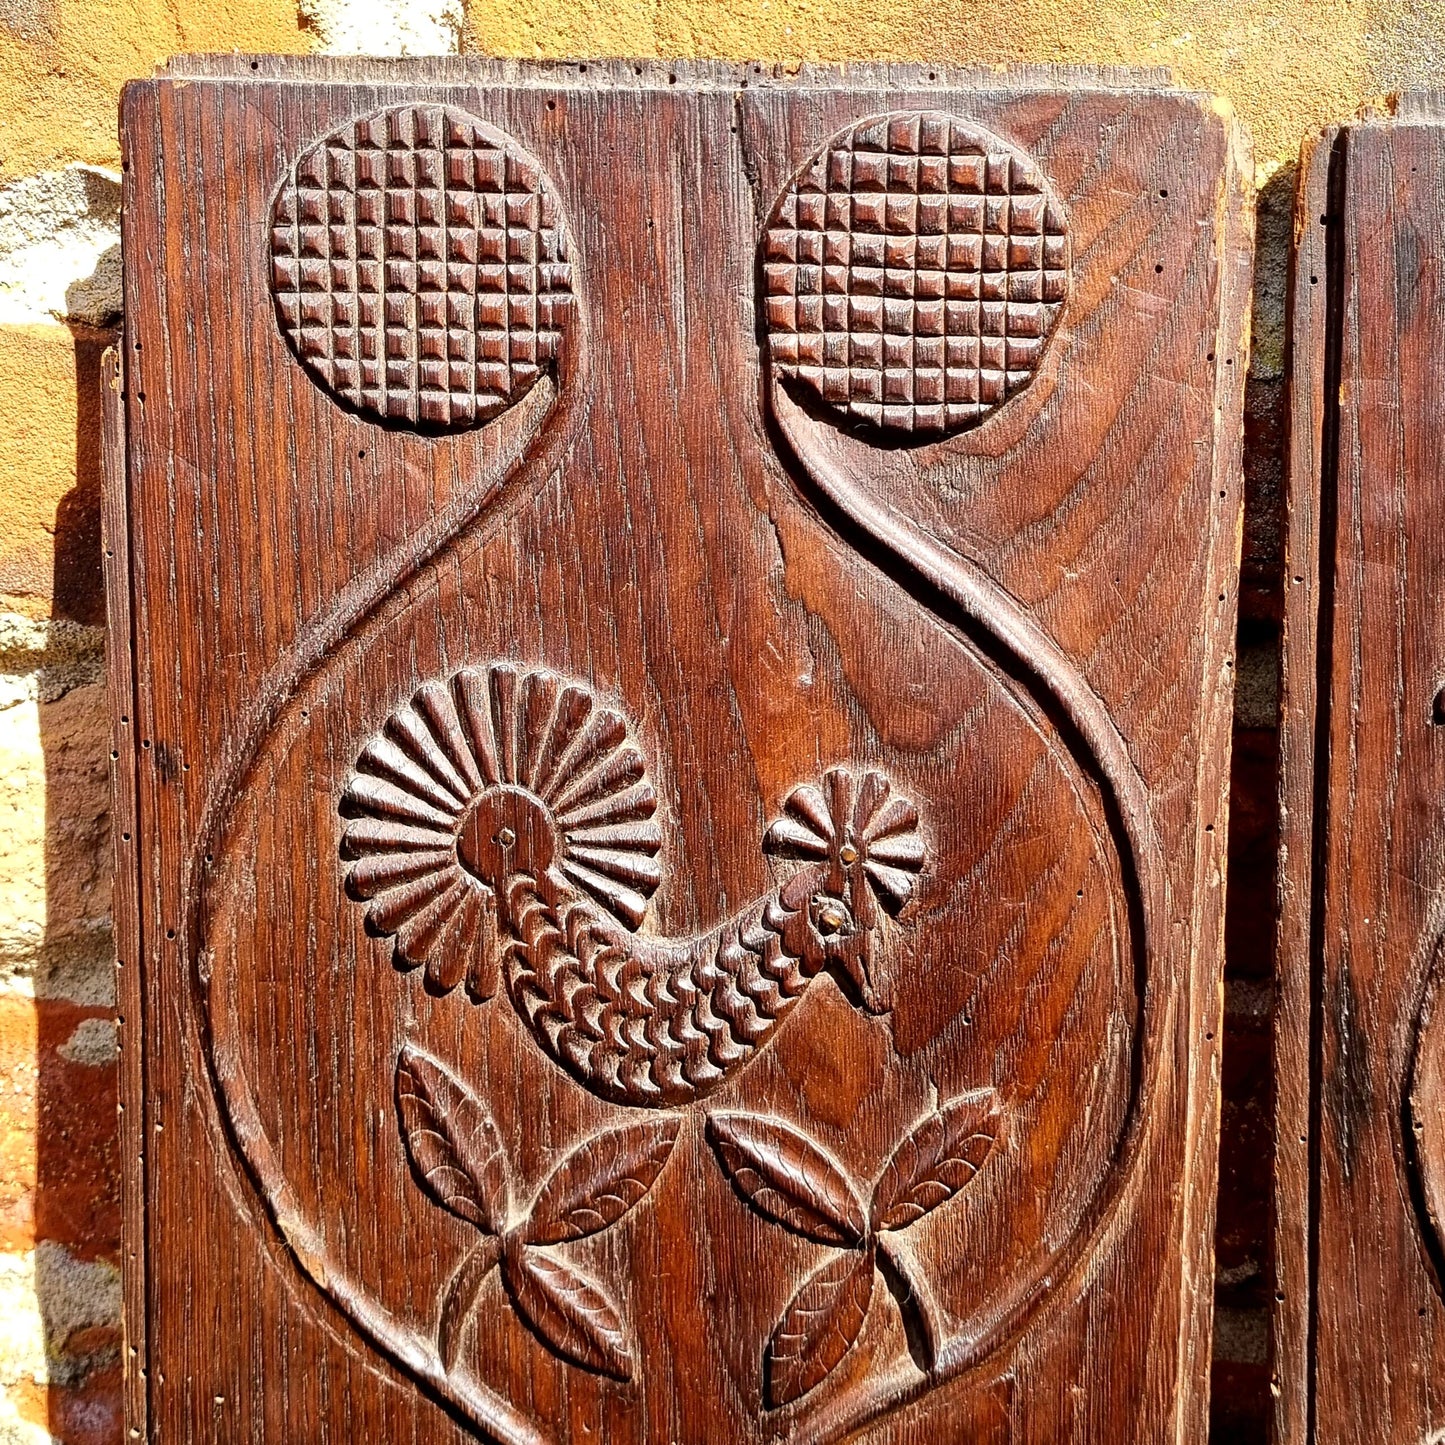 Rare Pair of Late 17th Century French Antique Carved Oak Panels Depicting Birds / Cockerels